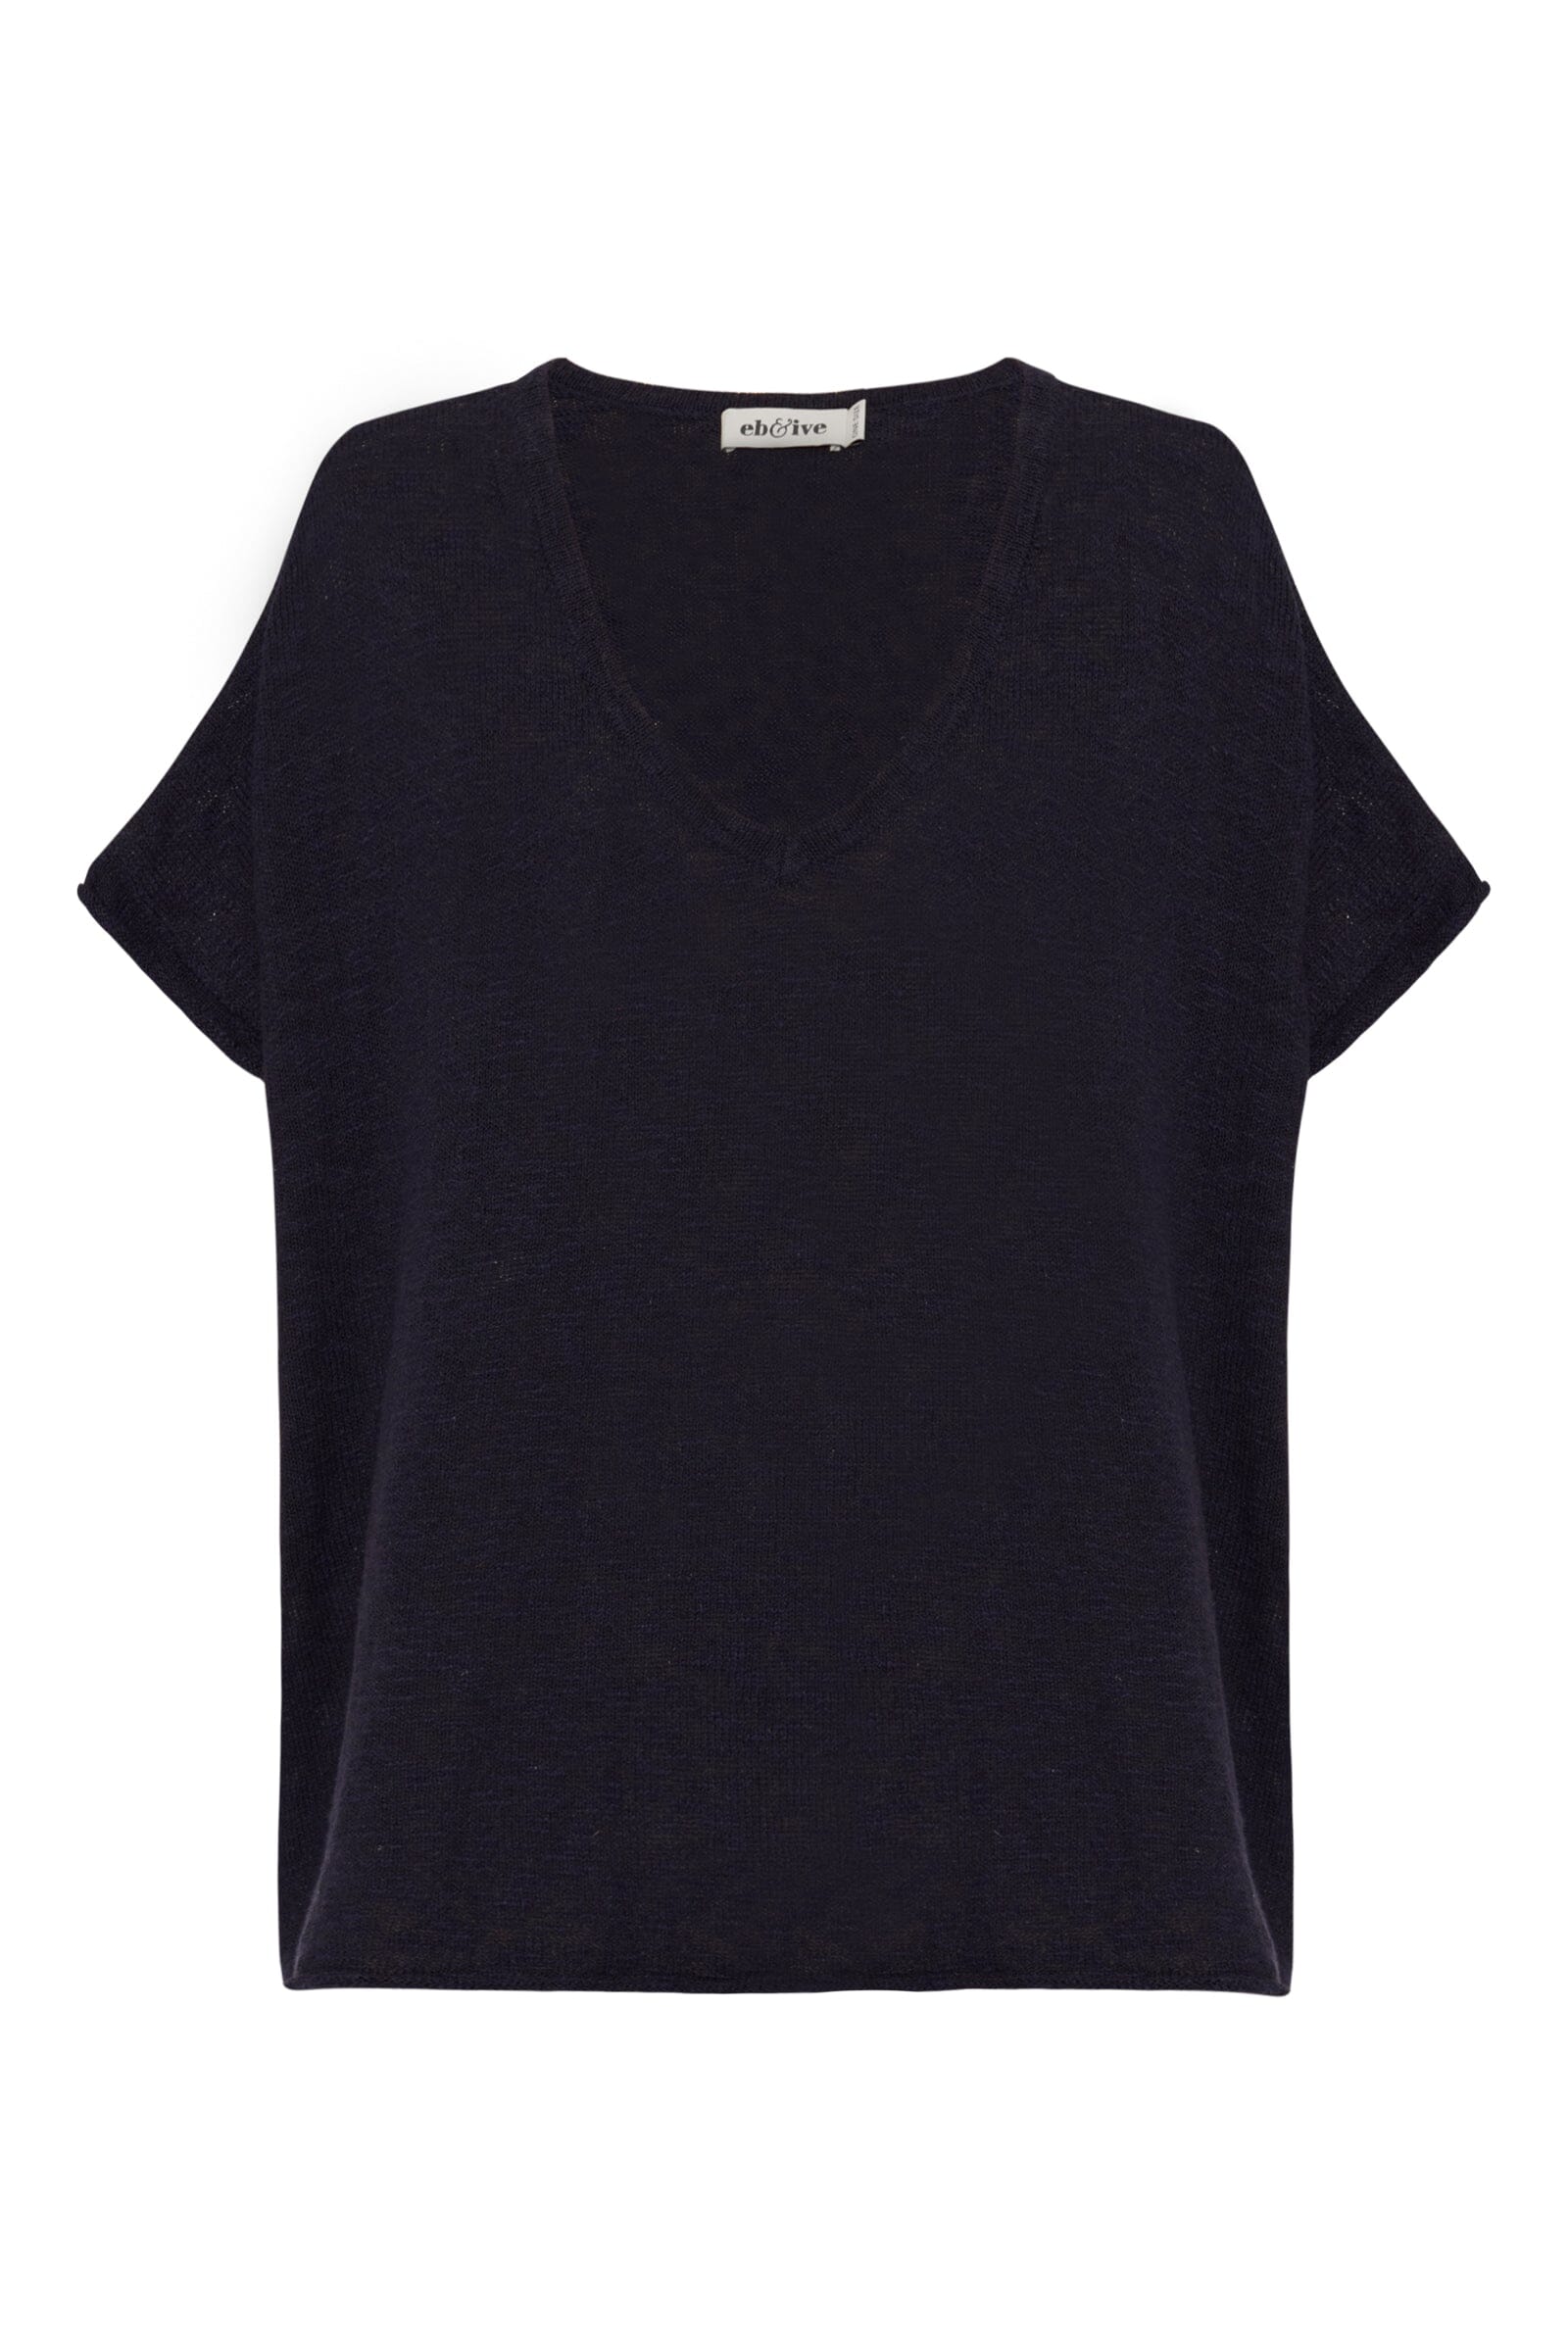 eb&ive - Jovial Top - Sapphire Womens eb&ive